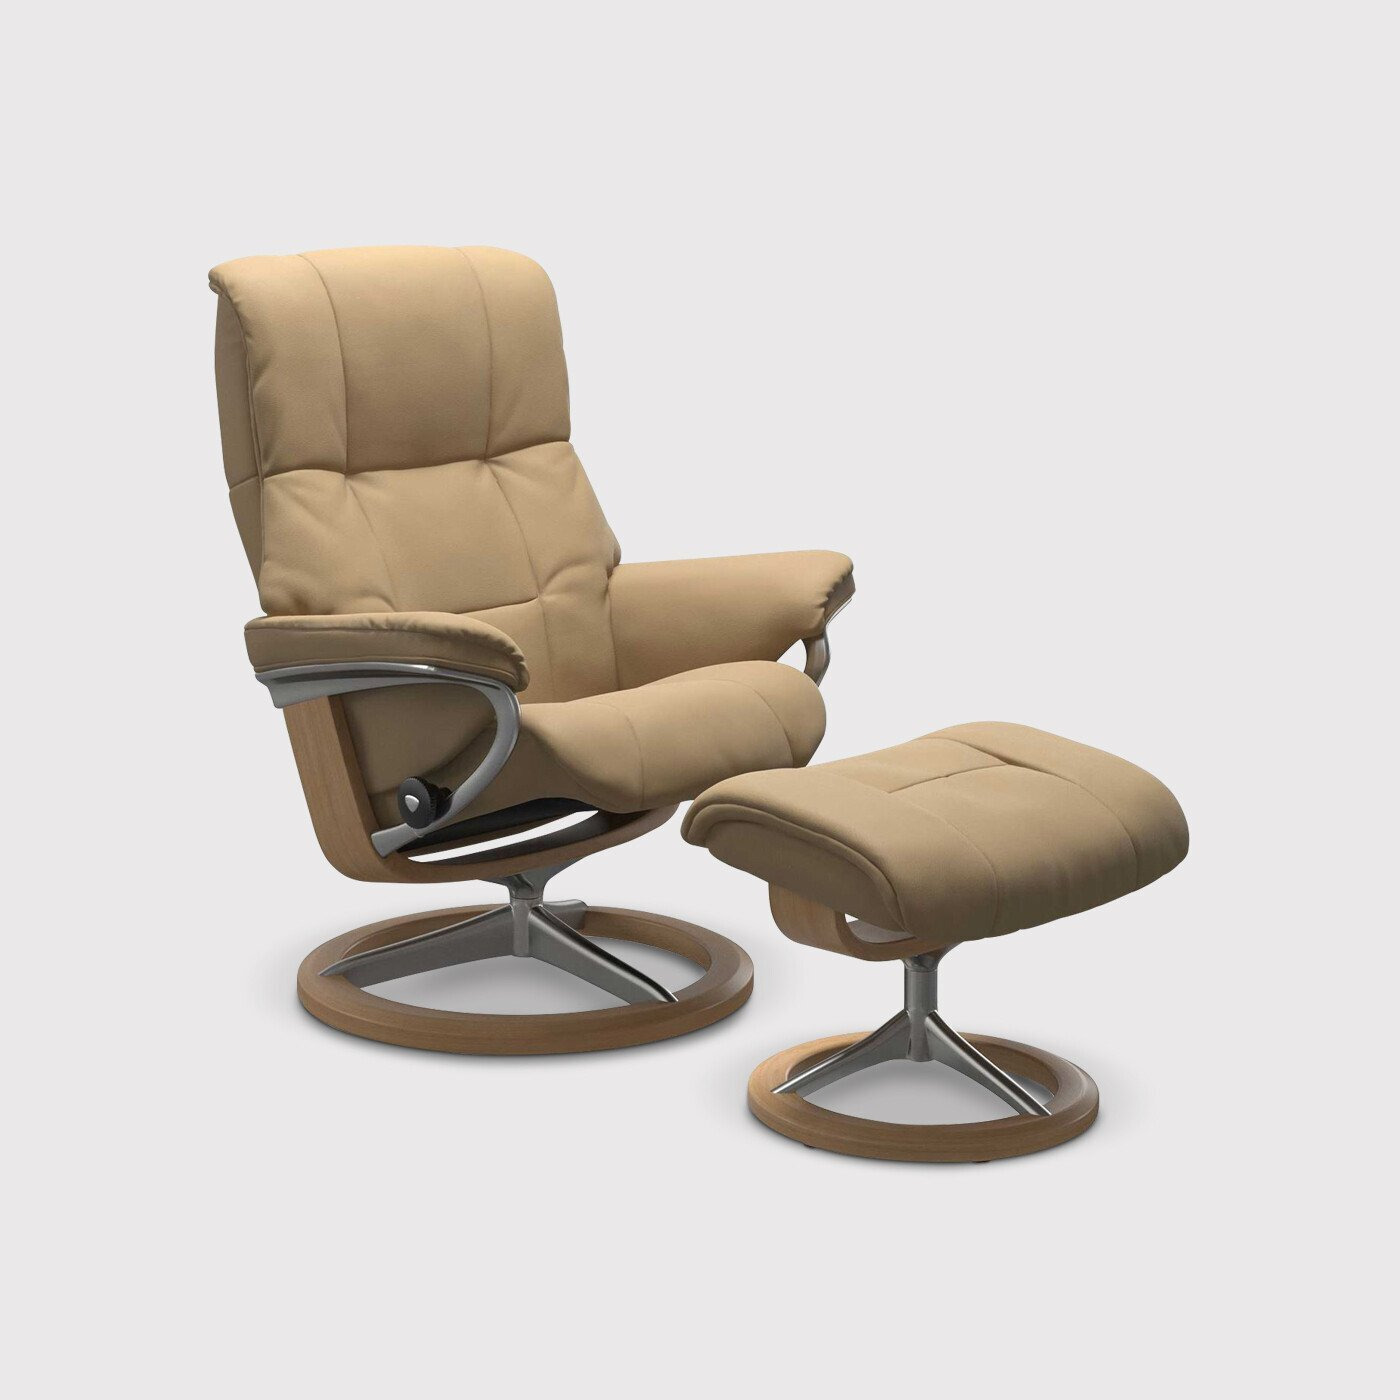 Stressless Mayfair Medium Recliner Chair & Stool With Signature Base, Neutral Leather - Barker & Stonehouse - image 1